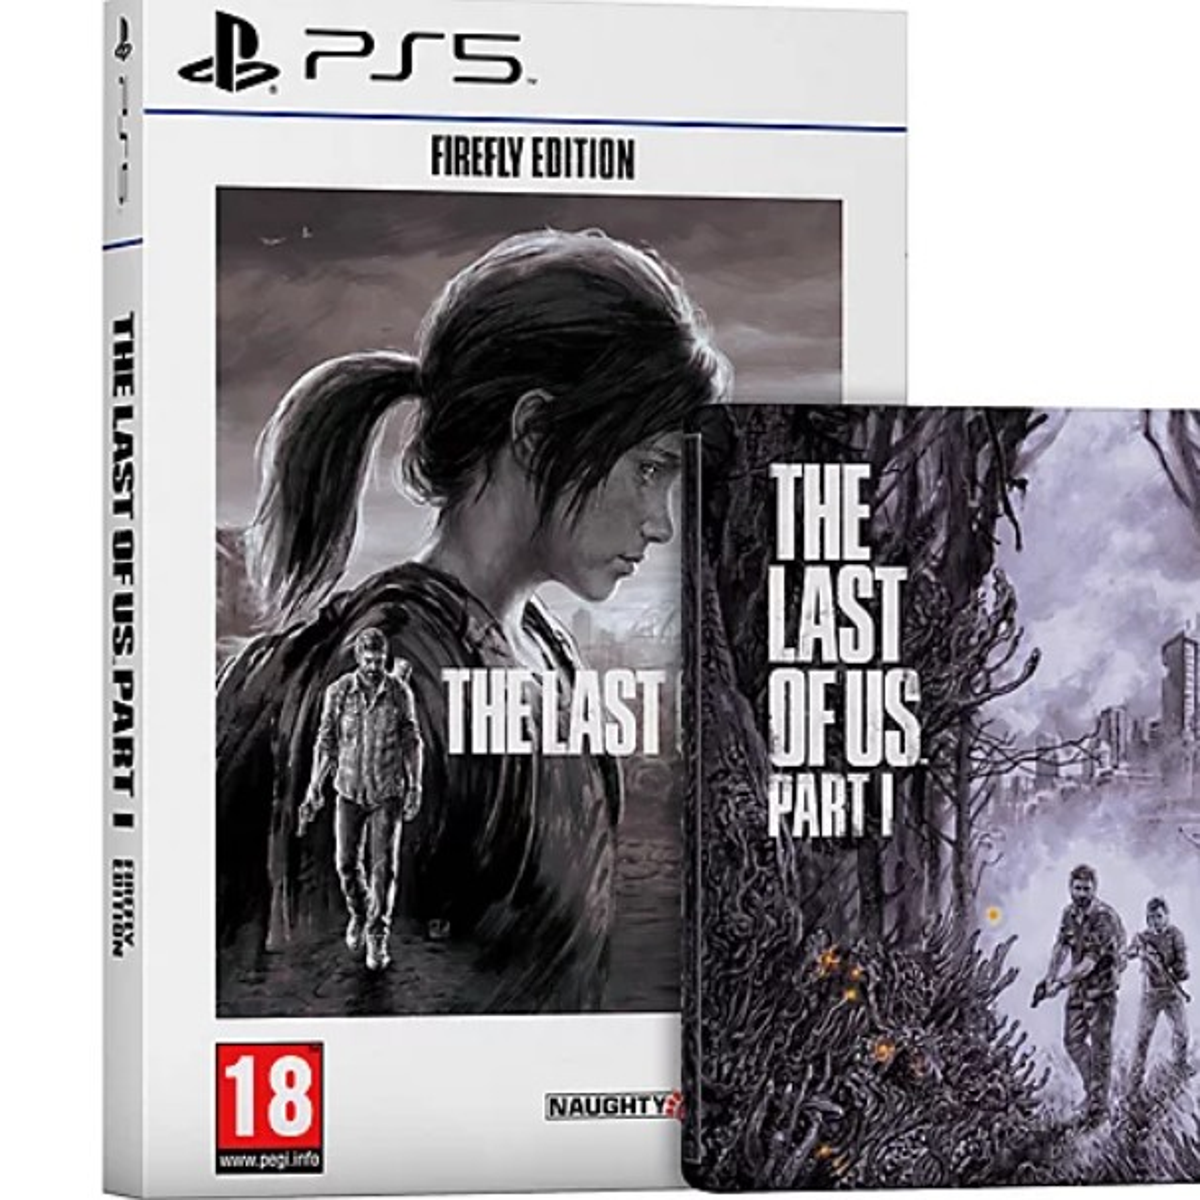 Buy The Last of Us™ Part I Firefly Edition - PC Game